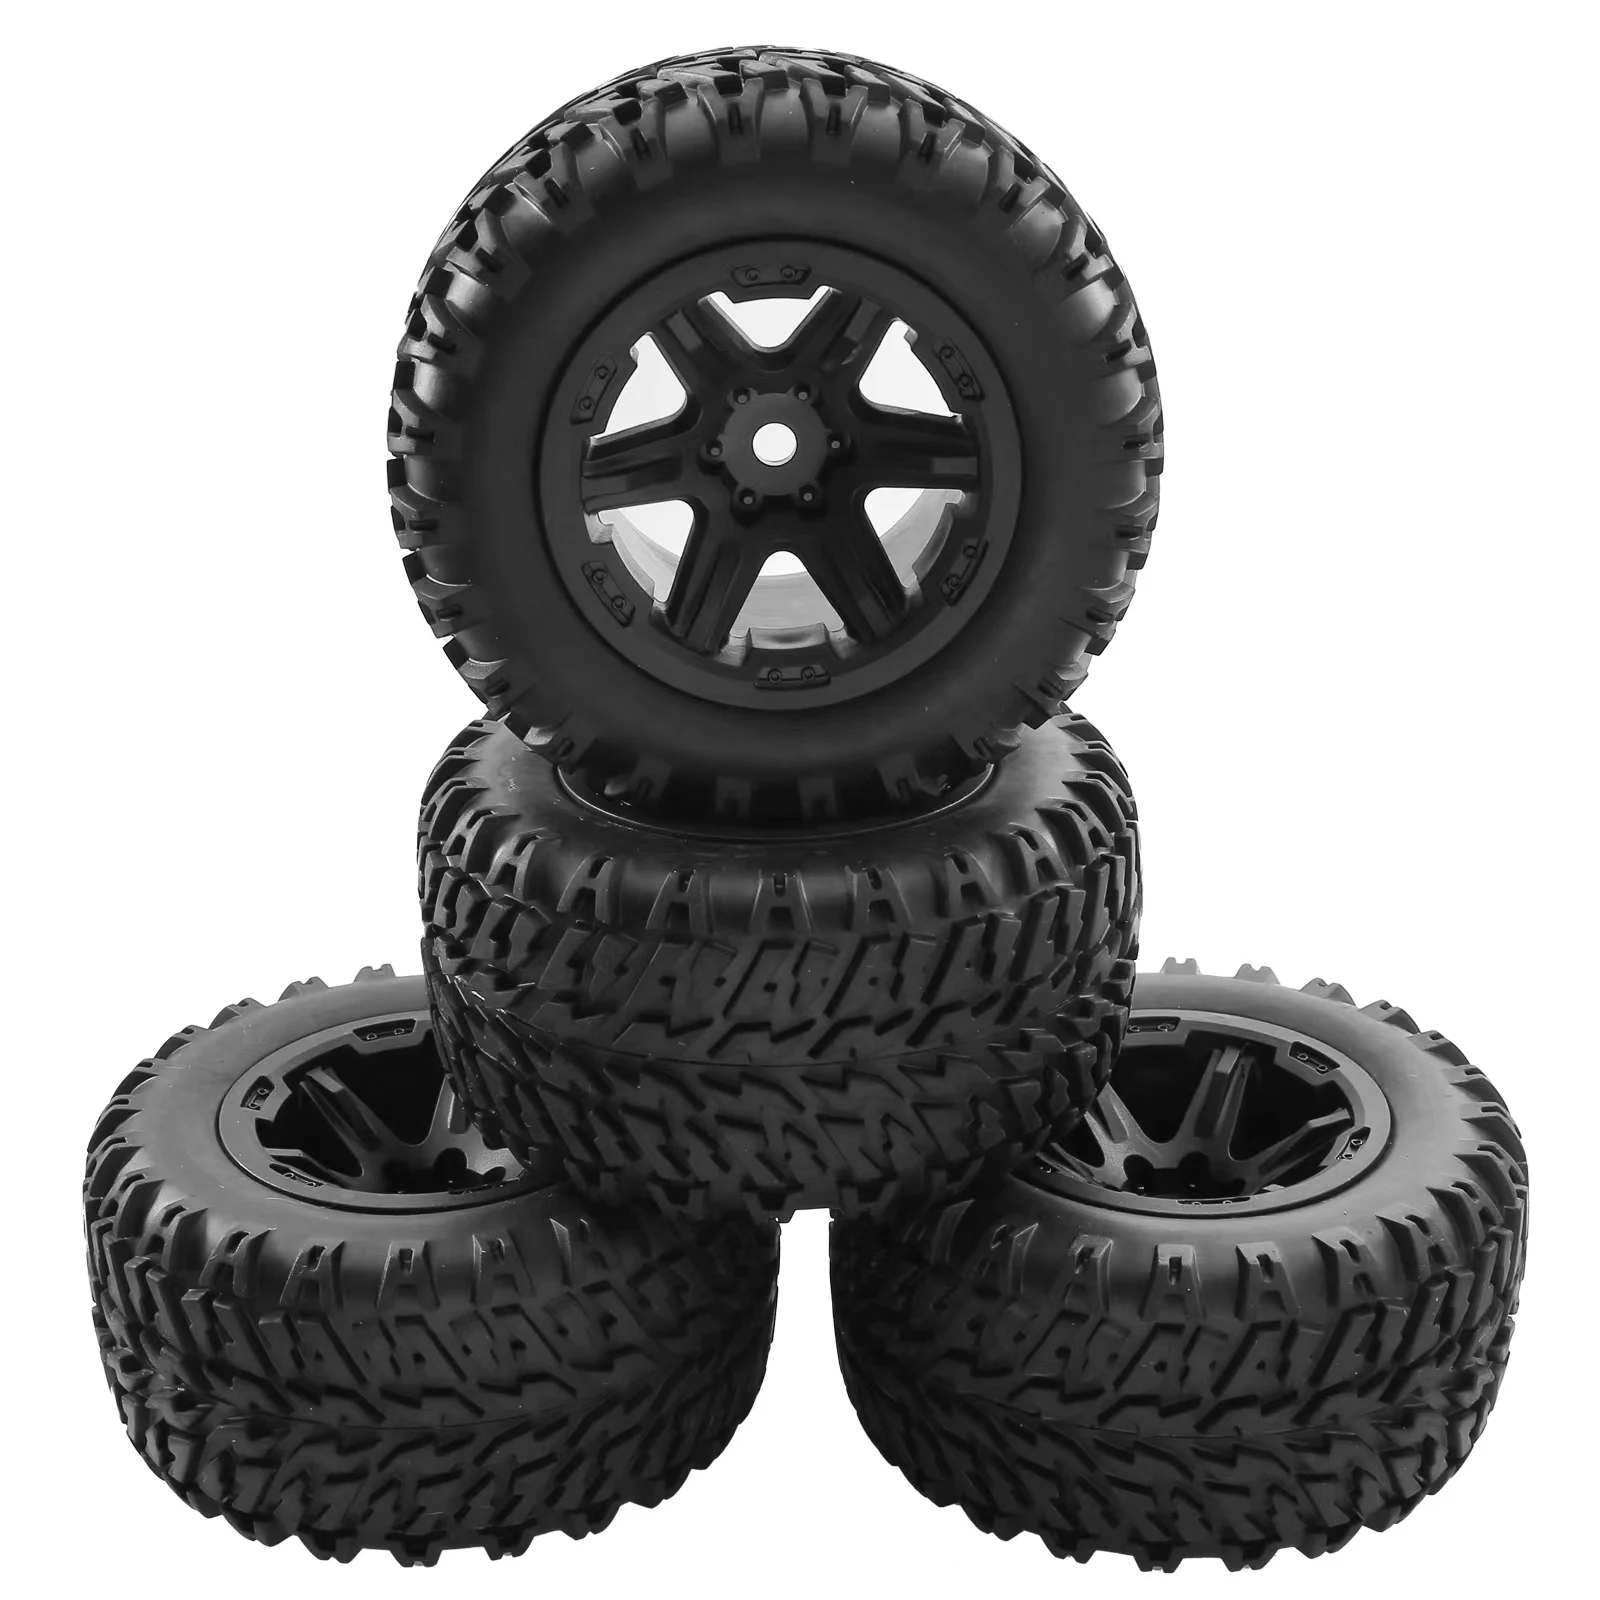 

4pcs 104mm 1/10 Monster Truck Buggy Tires Wheel 12mm Hex for Traxxas HSP HPI Tamiya Kyosho Wltoys Upgrade Parts